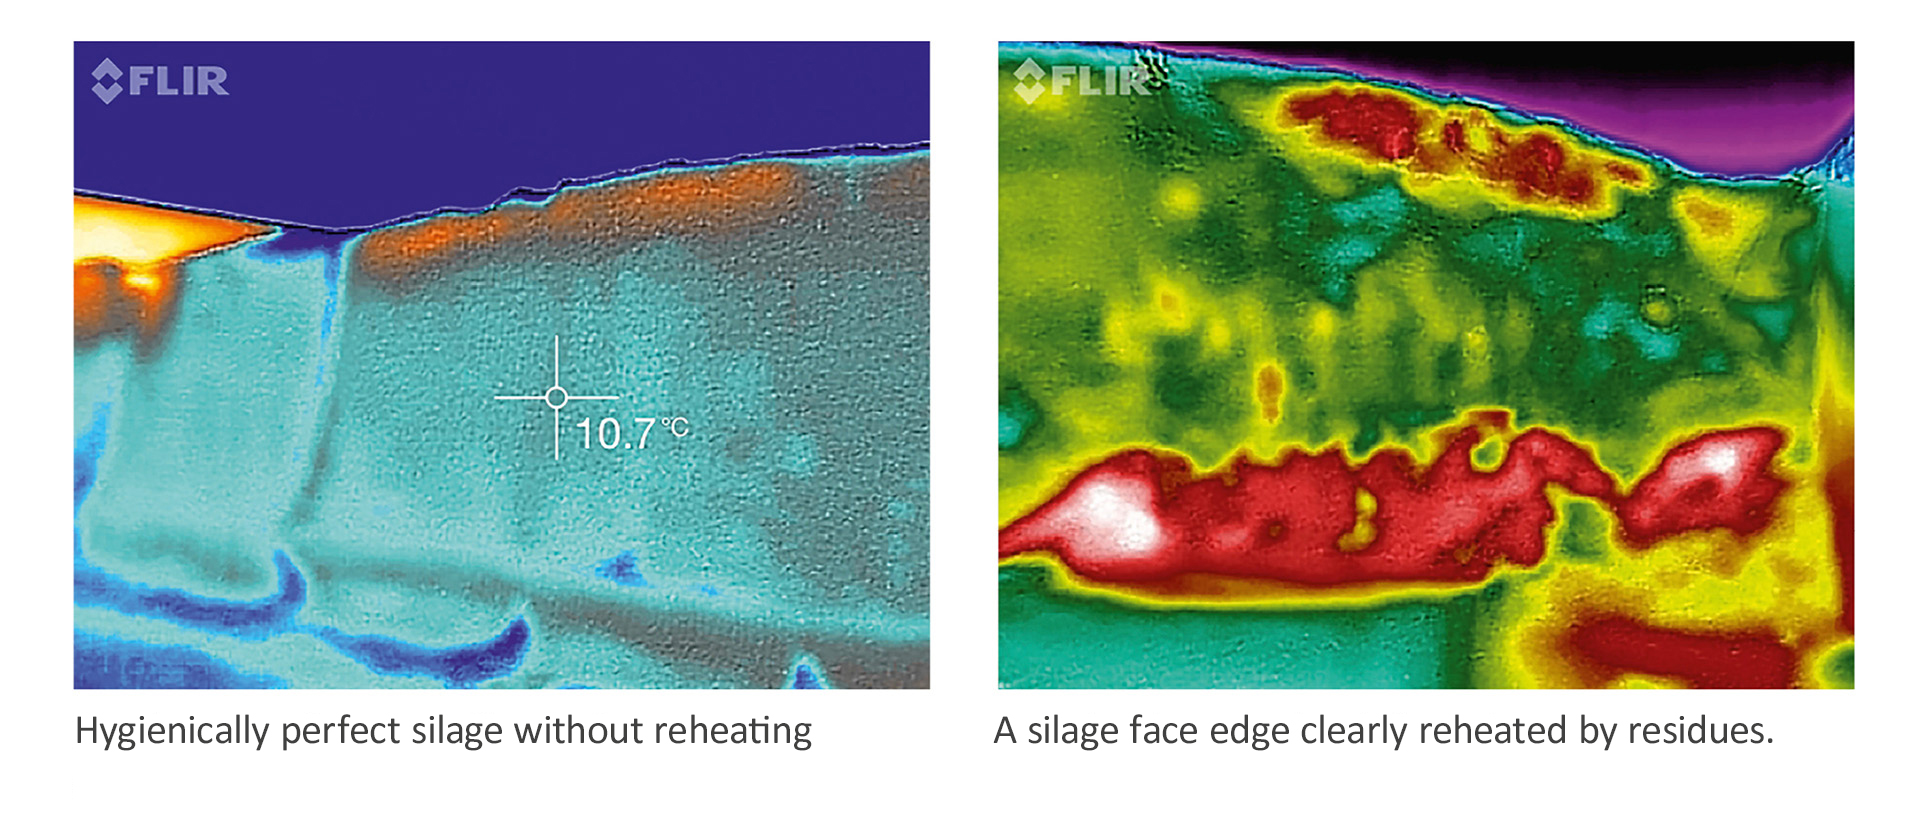 Thermal images clearly show the reheating at the silage face